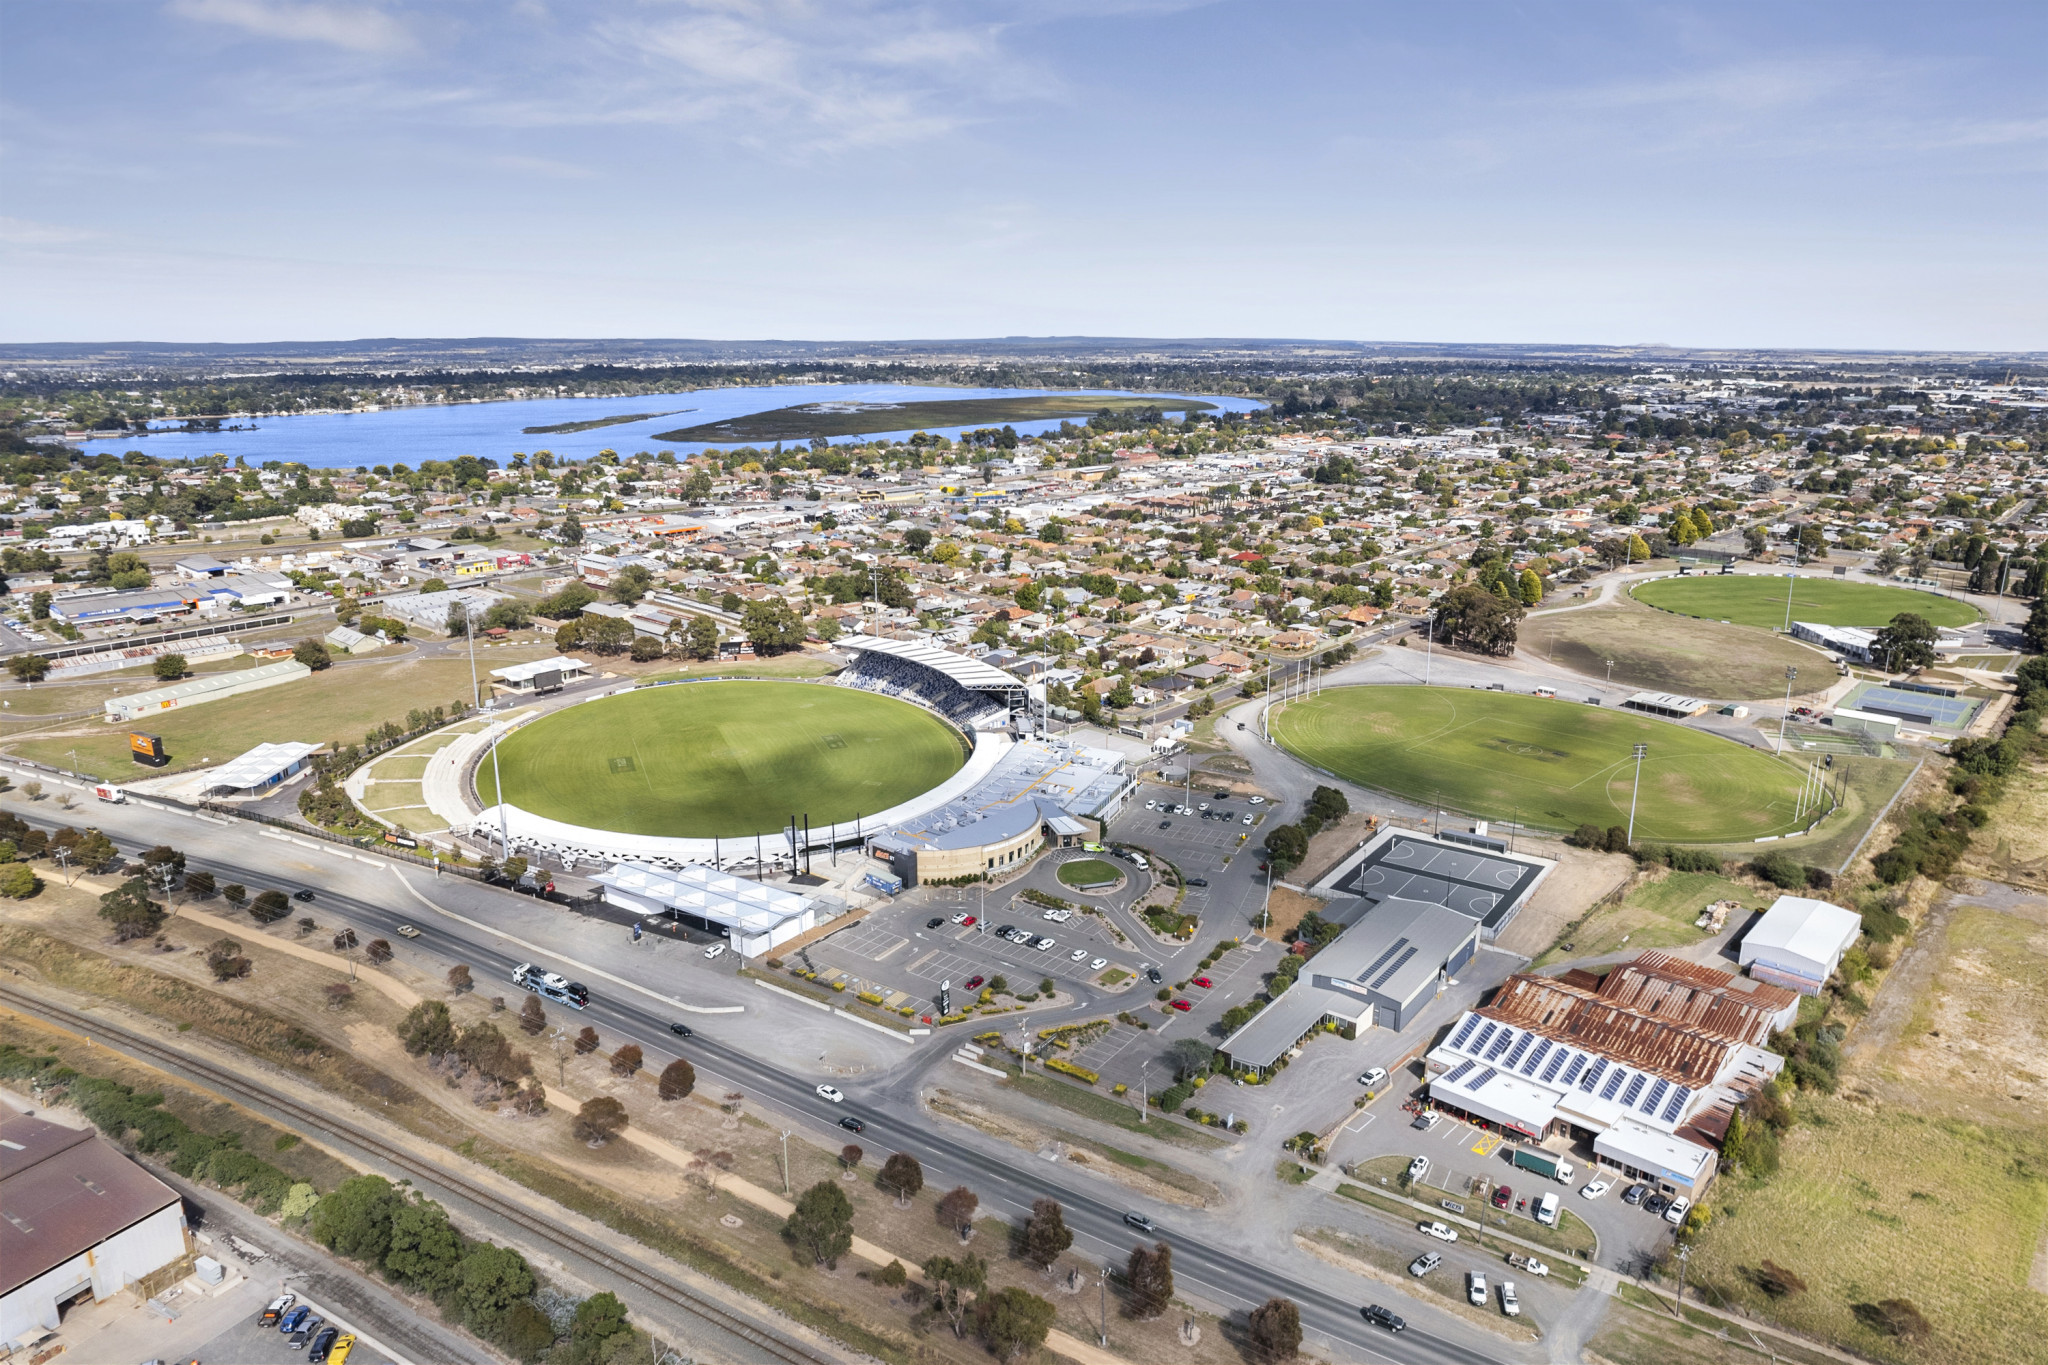 Ballarat is one of four regional hubs planned for the 2026 Commonwealth Games in Victoria, which means spectators will have to plan their trips carefully, a leading official has warned ©City of Ballarat